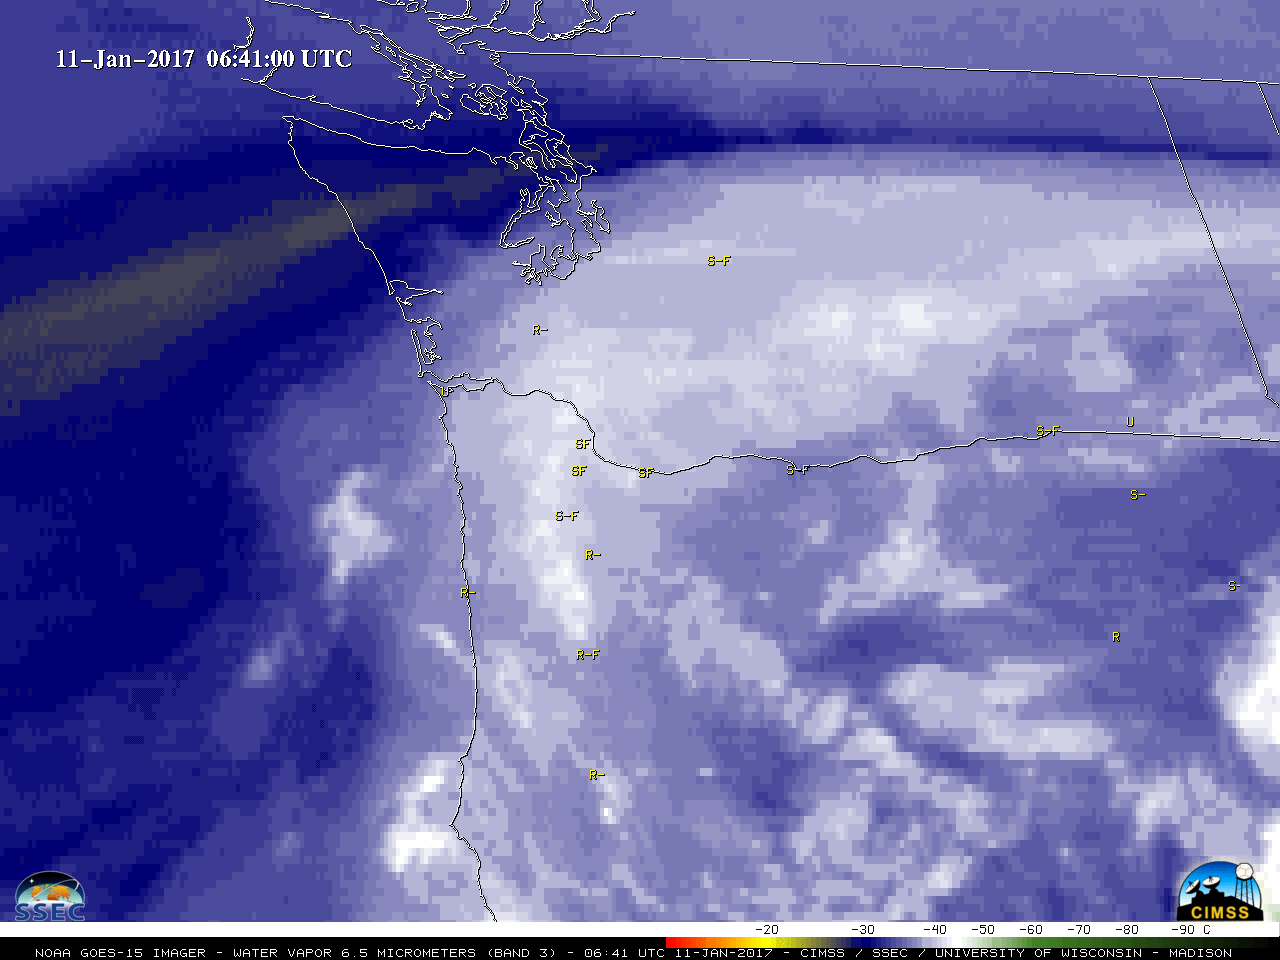 GOES-15 Water Vapor (6.5 µm) images, with hourly reports of surface weather type [click to play animation]